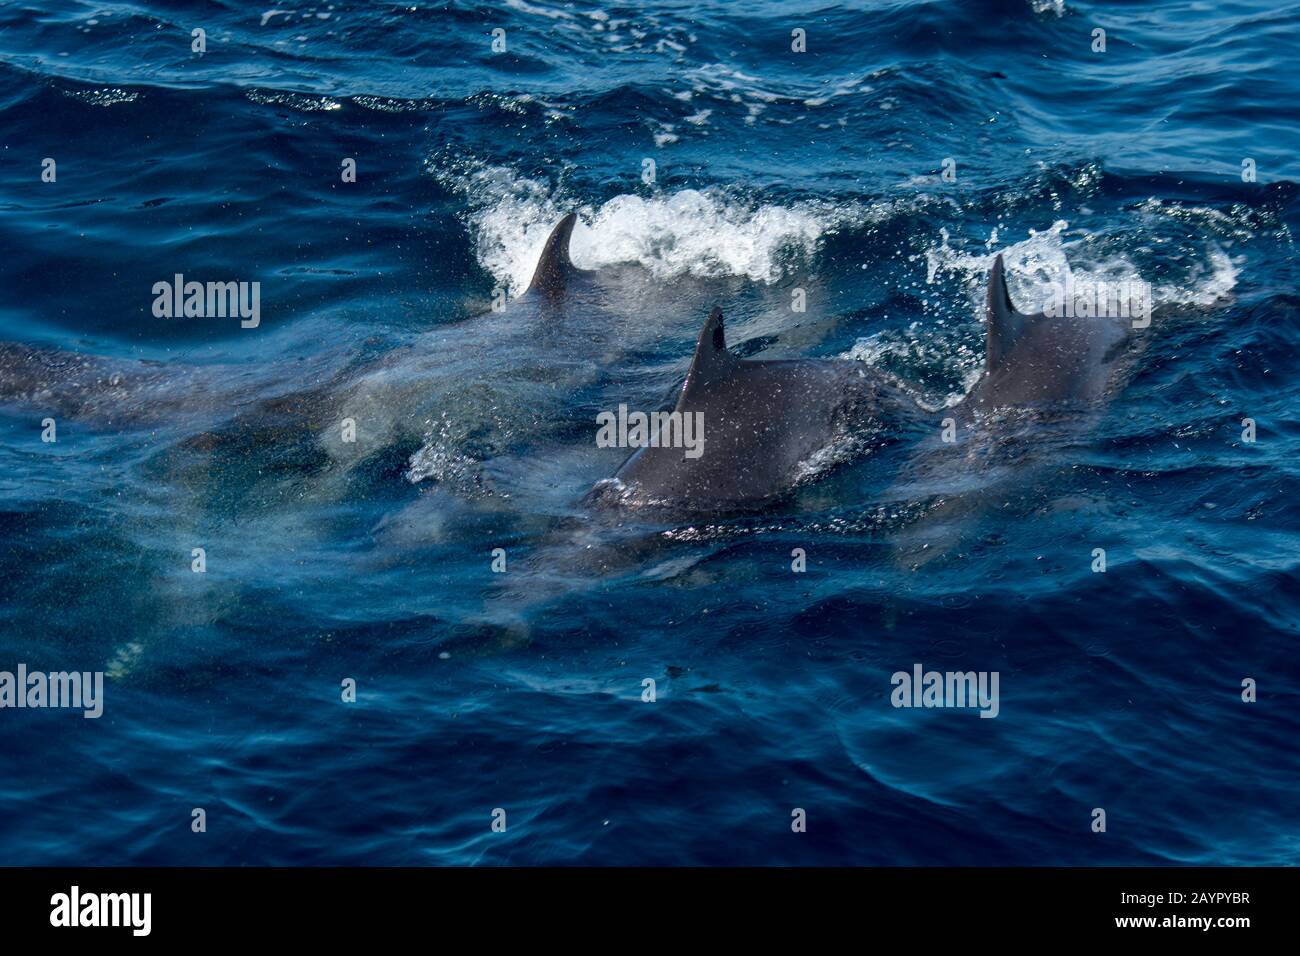 A group of pantropical spotted dolphin (Stenella attenuata) porpoising in the Pacific Ocean off the coast of Panama. Stock Photo